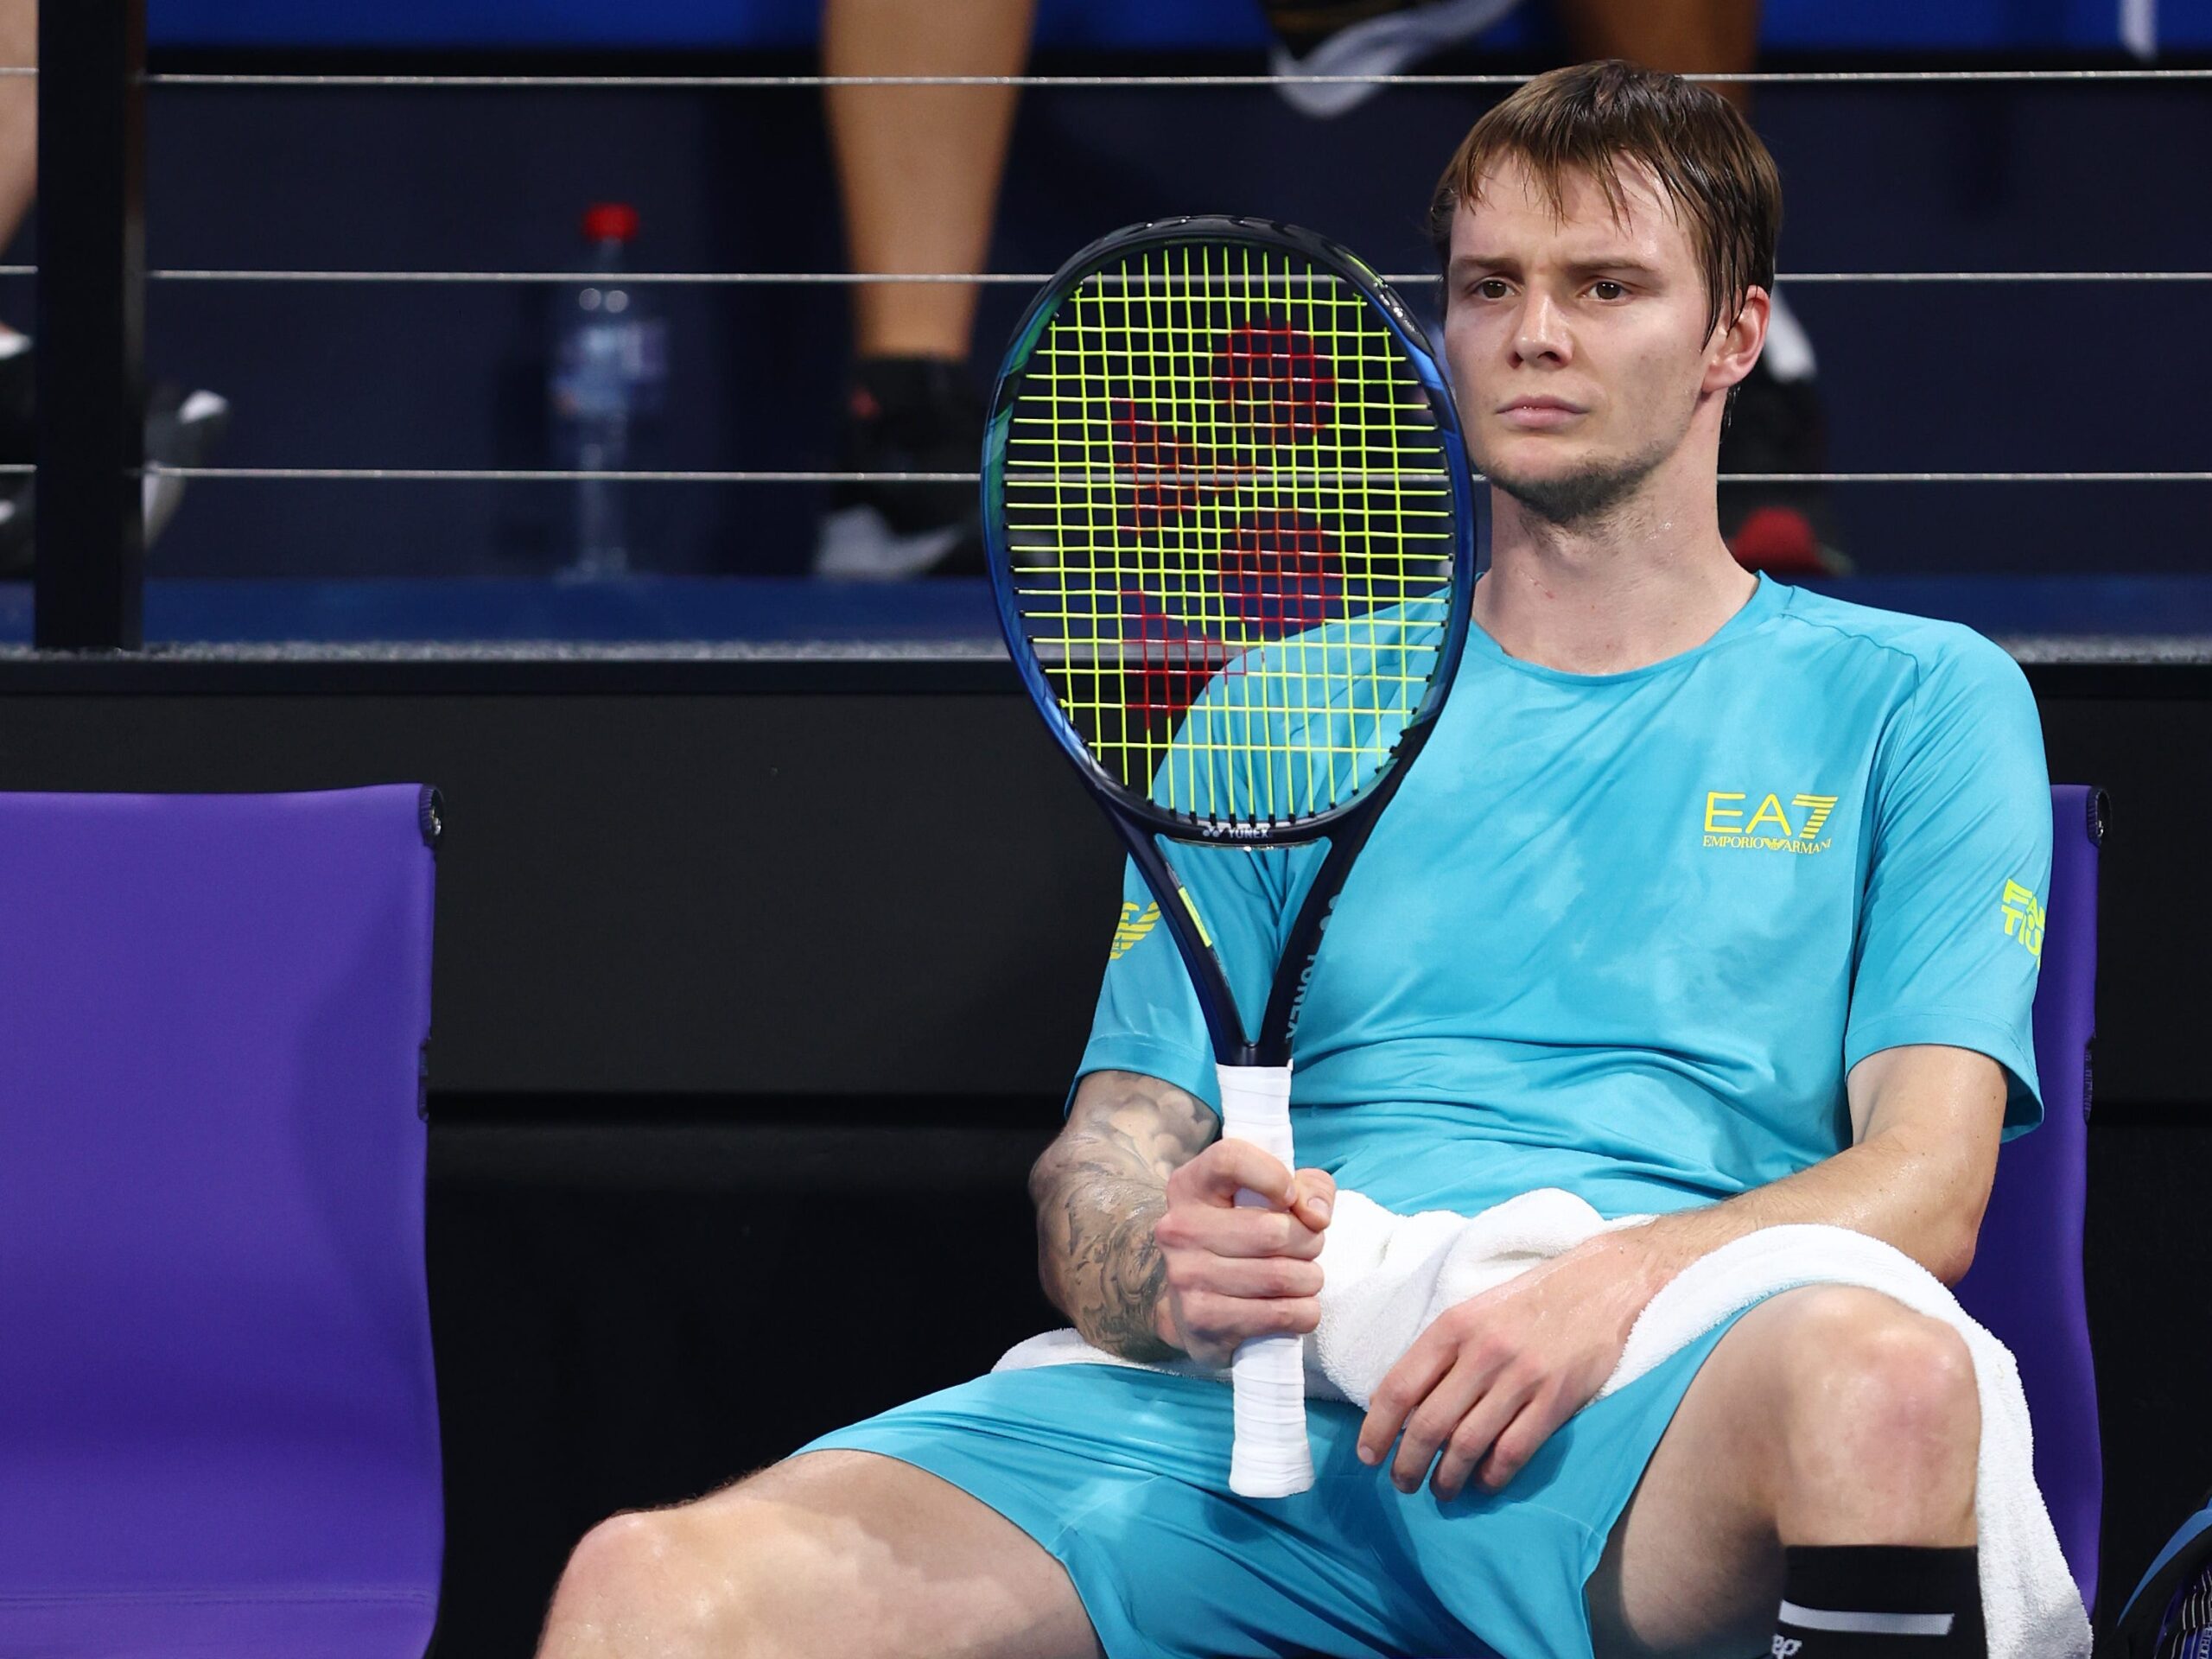 Pro tennis player Alexander Bublik flew into a rage and smashed 3 rackets on court, and as usual, the commentators are the most memorable part of it all